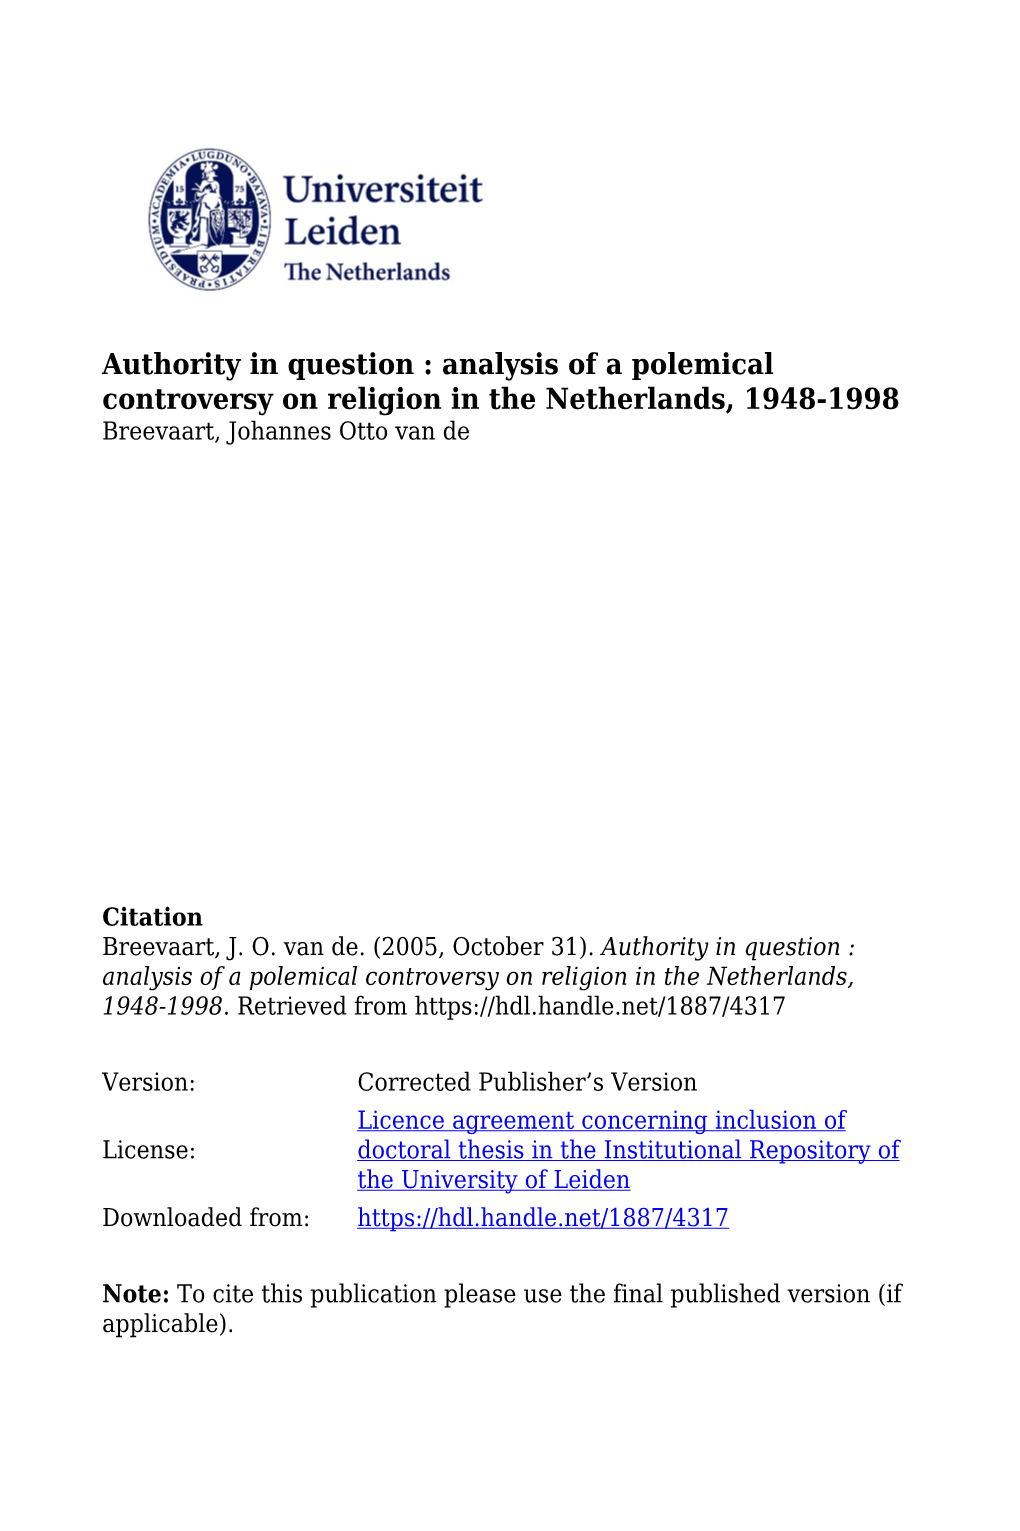 Authority in Question : Analysis of a Polemical Controversy on Religion in the Netherlands, 1948-1998 Breevaart, Johannes Otto Van De